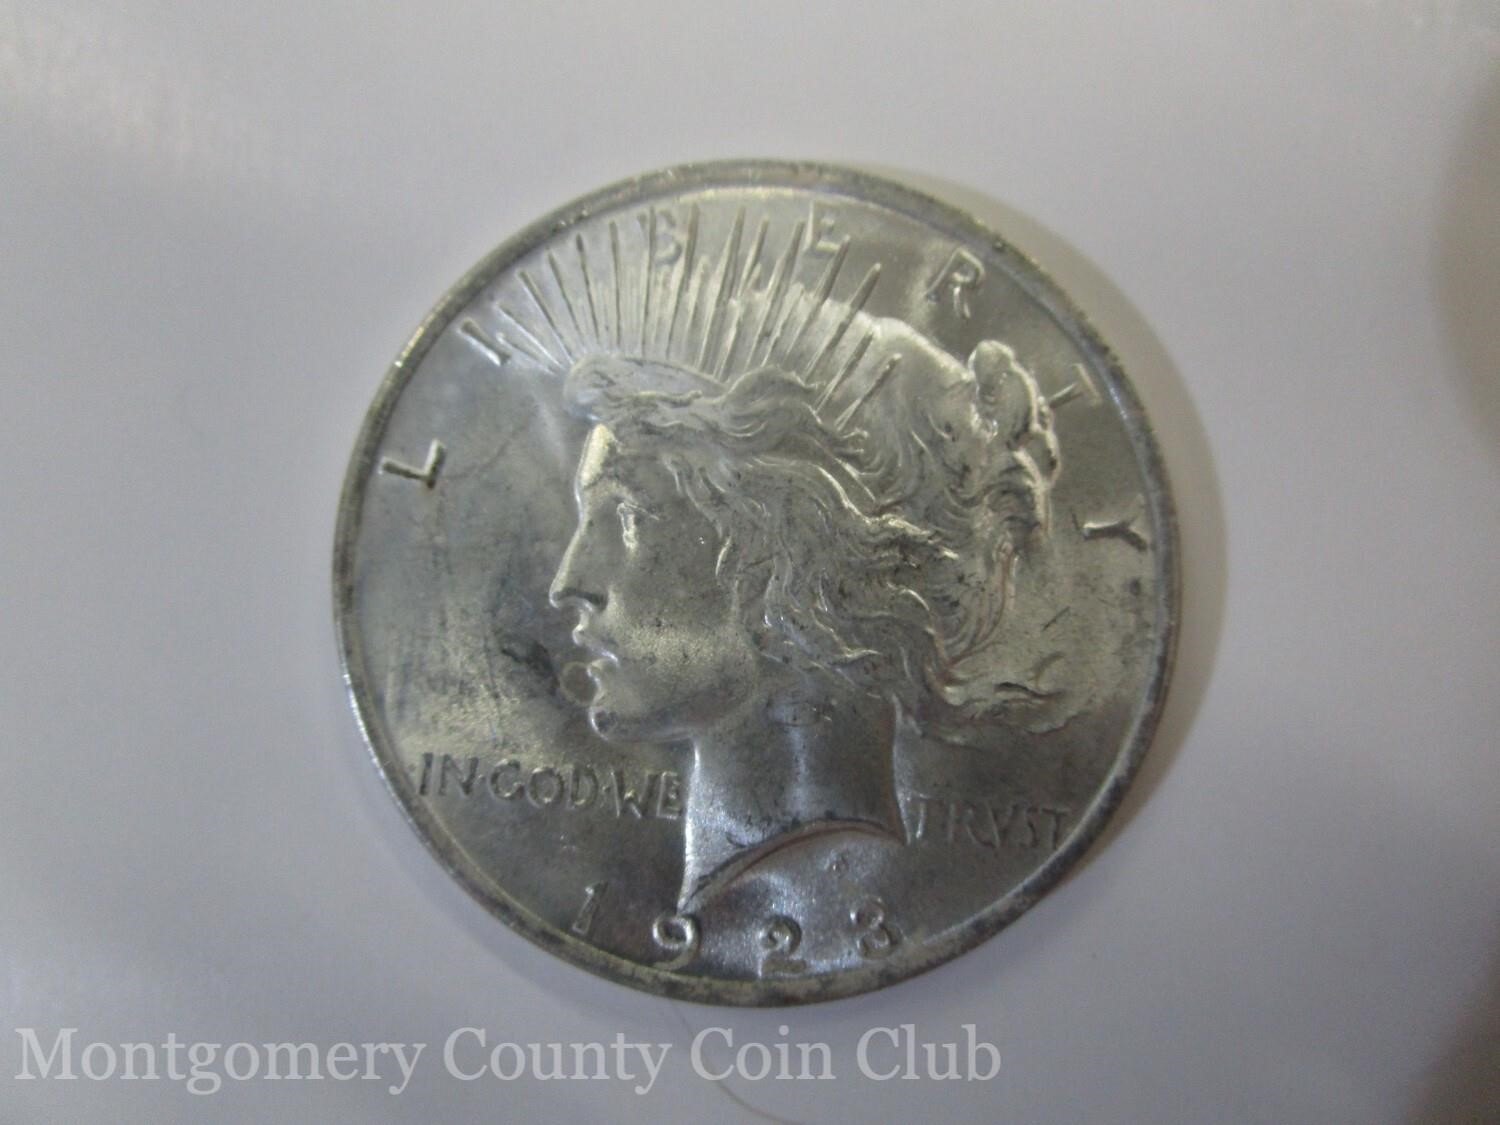 Montgomery County Coin Club Online Auction #5